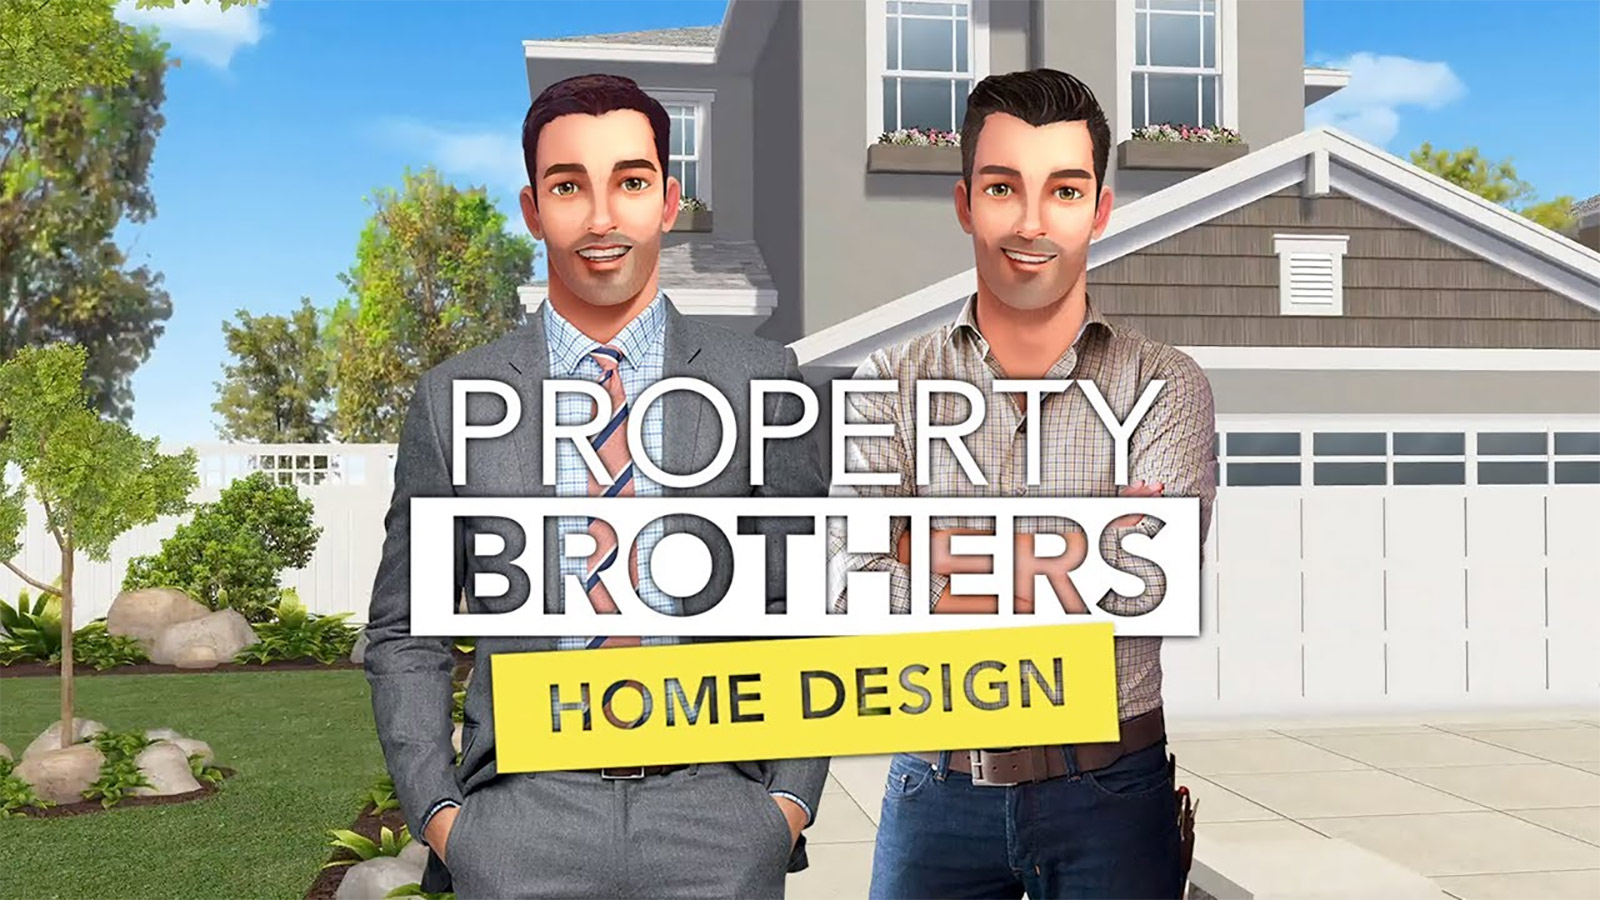 Property Brothers Home Design Mod Apk2.4.5g (Unlimited Money)